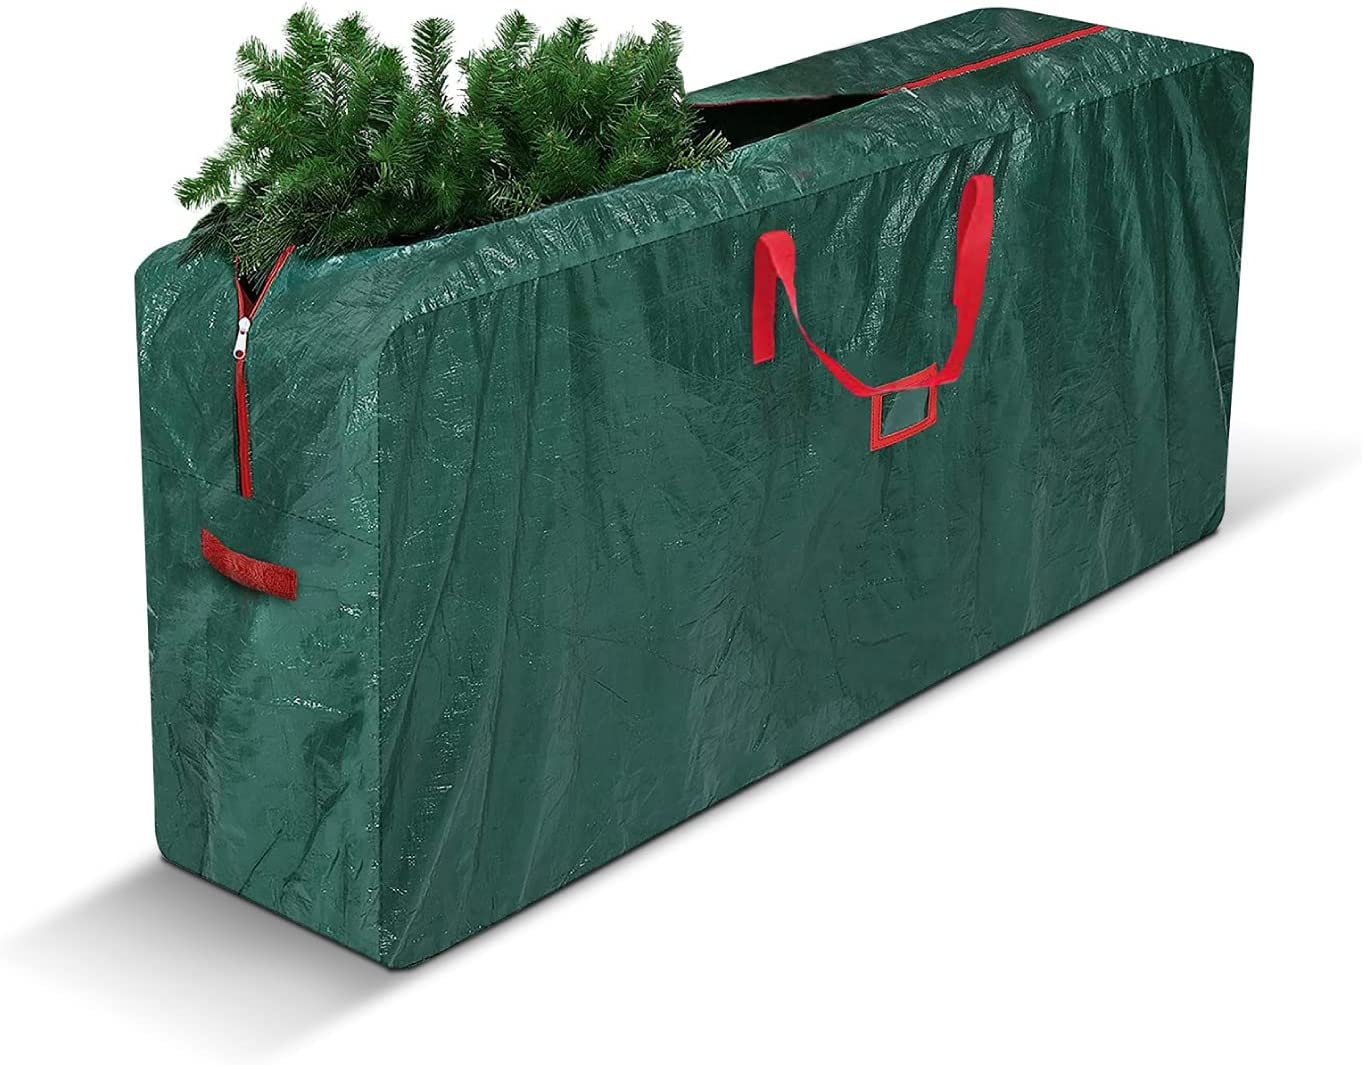 STERUN Waterproof Durable Up to 7FT Christmas Tree Storage Bag With Carry Handle & Double Zipper Ideal For Artificial Tree | Christmas Tree Storage Bag | Christmas Storage 120 x 43 x 25 cm